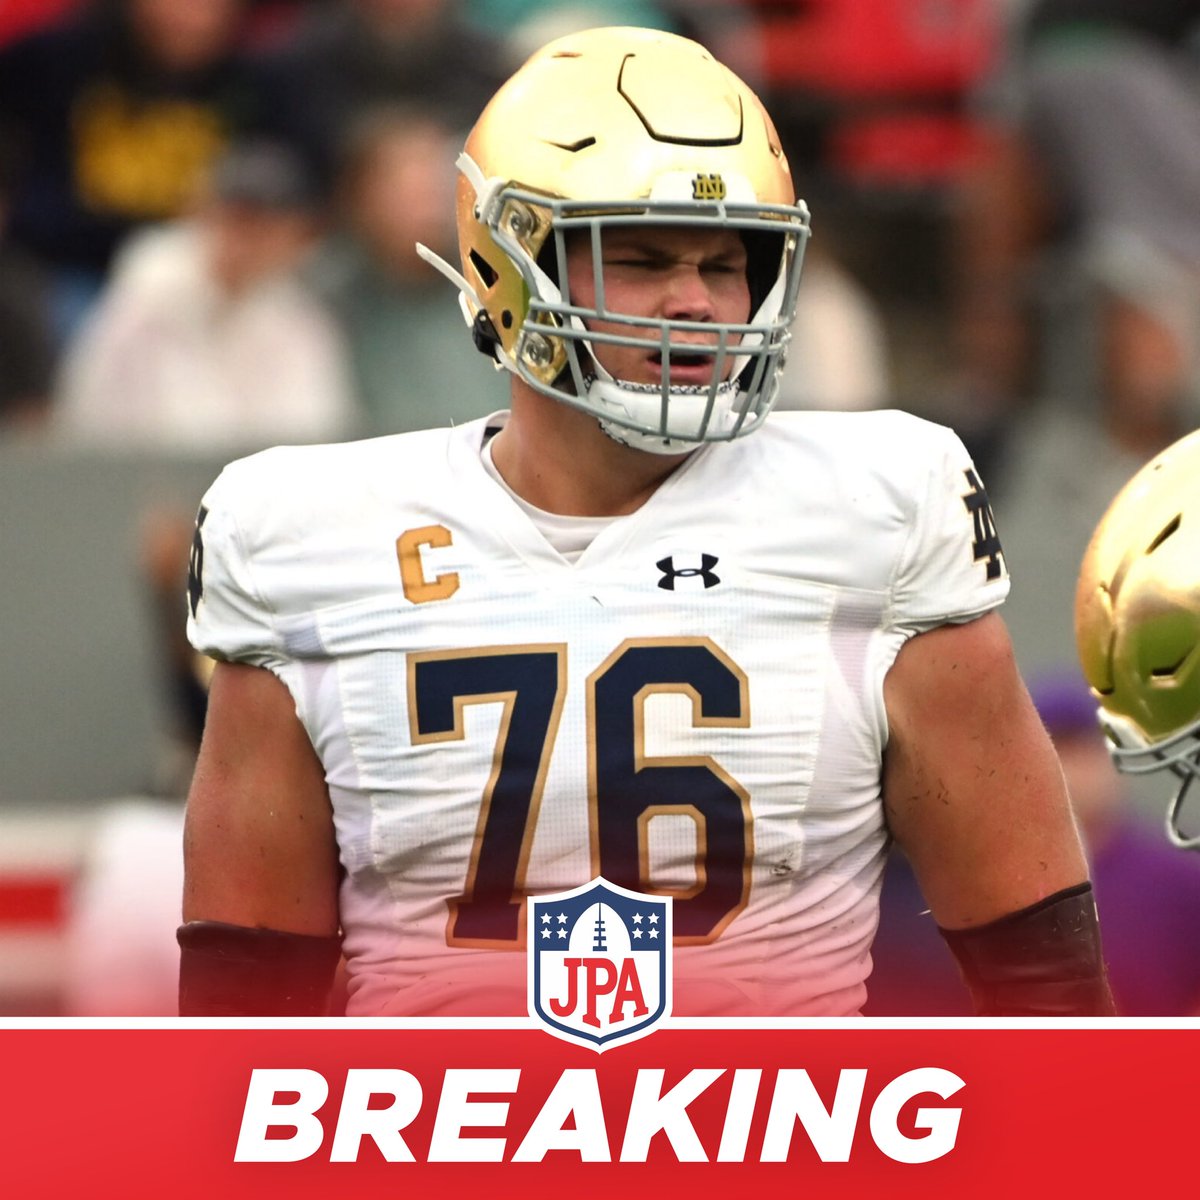 𝗧𝗛𝗘 𝗣𝗜𝗖𝗞 𝗜𝗦 𝗜𝗡: The #Chargers are drafting OT Joe Alt with the #5 overall pick.